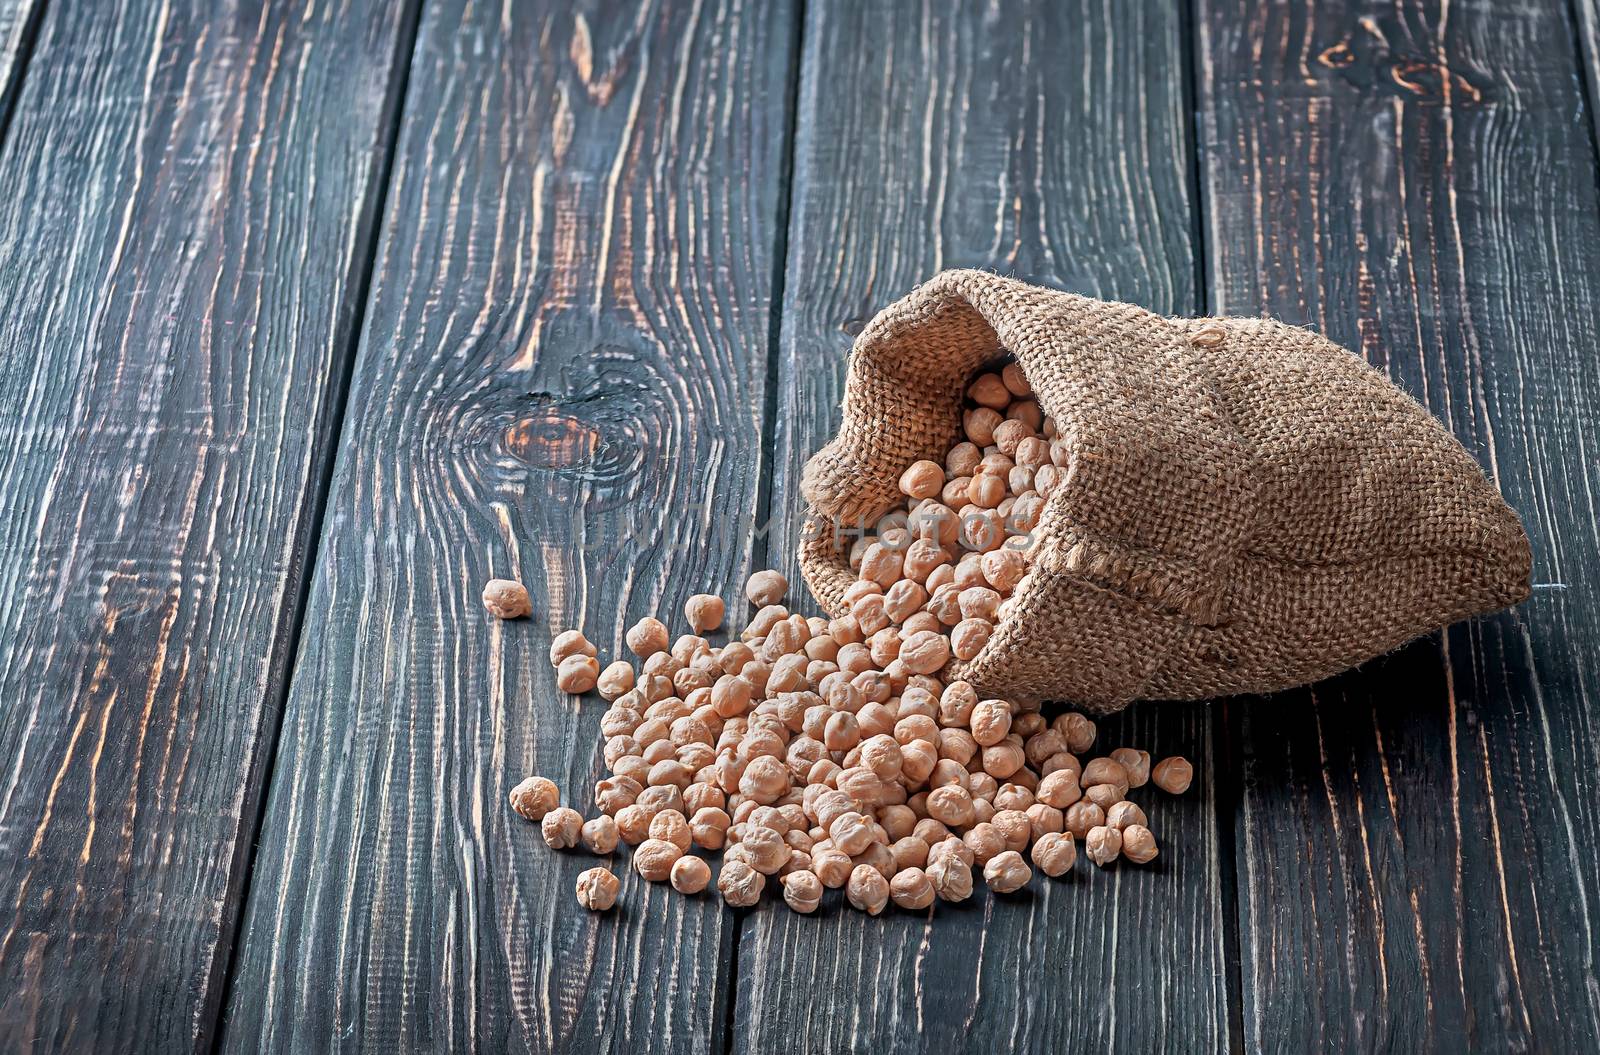 Chickpea spill out of the bag on wooden background